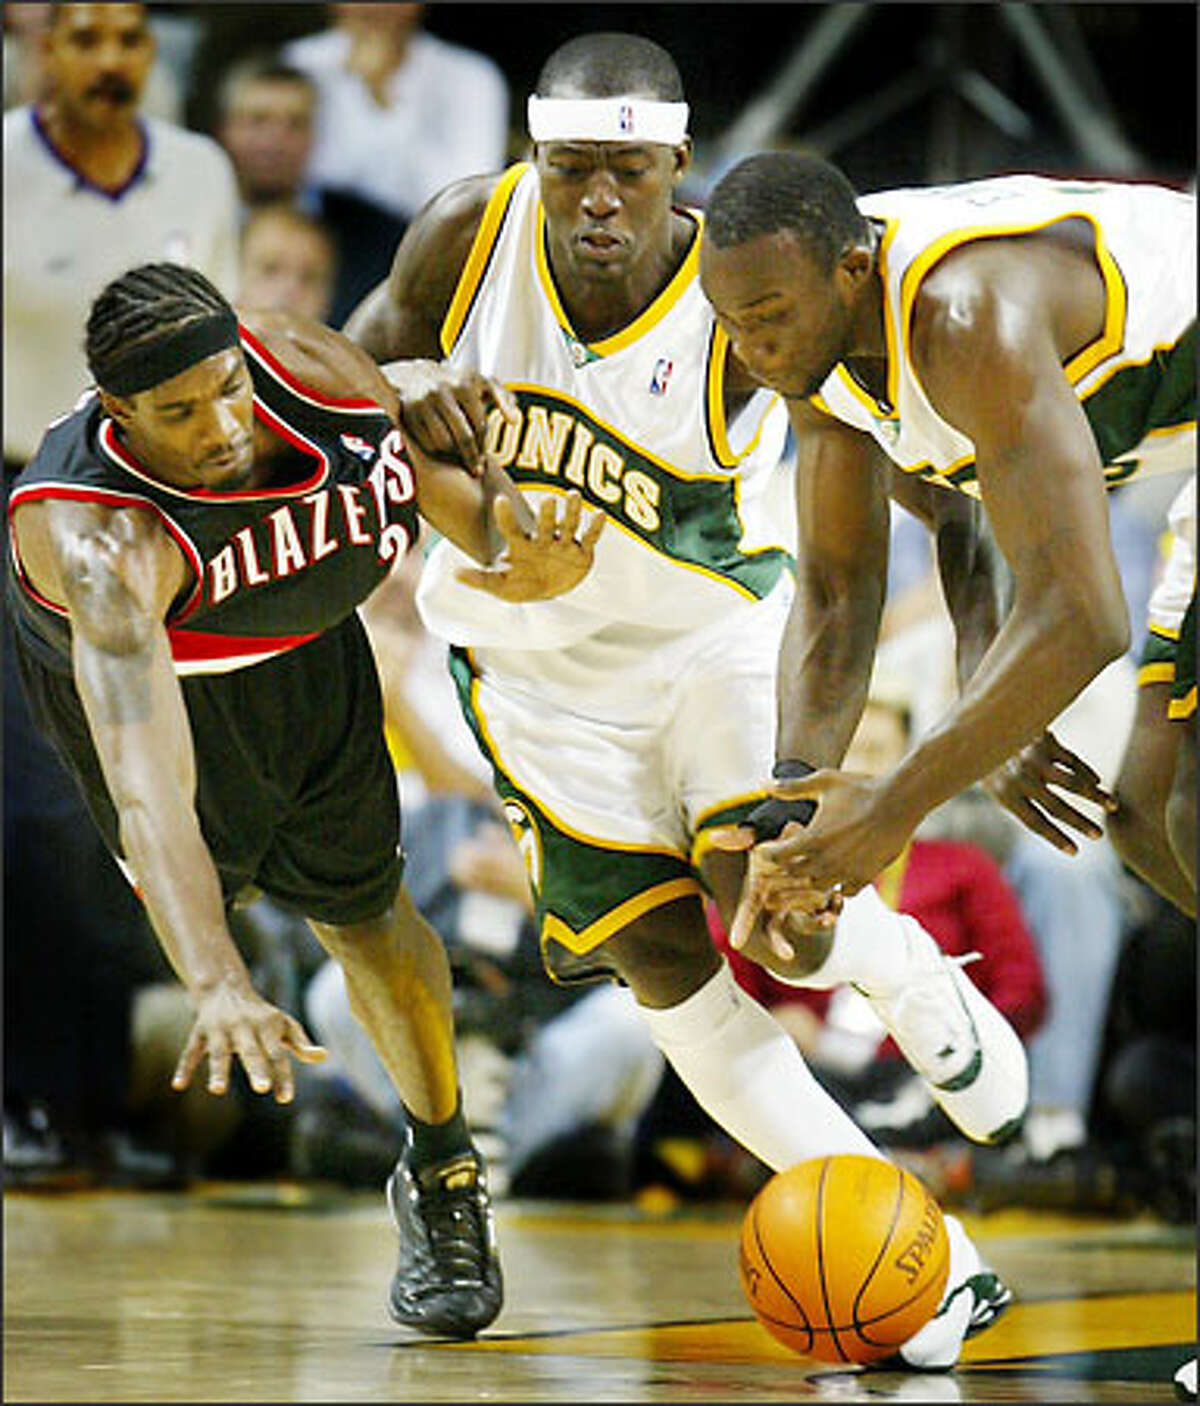 Antonio Daniels and Reggie Evans battle for a loose ball with the Blazers' Jeff McInnis.